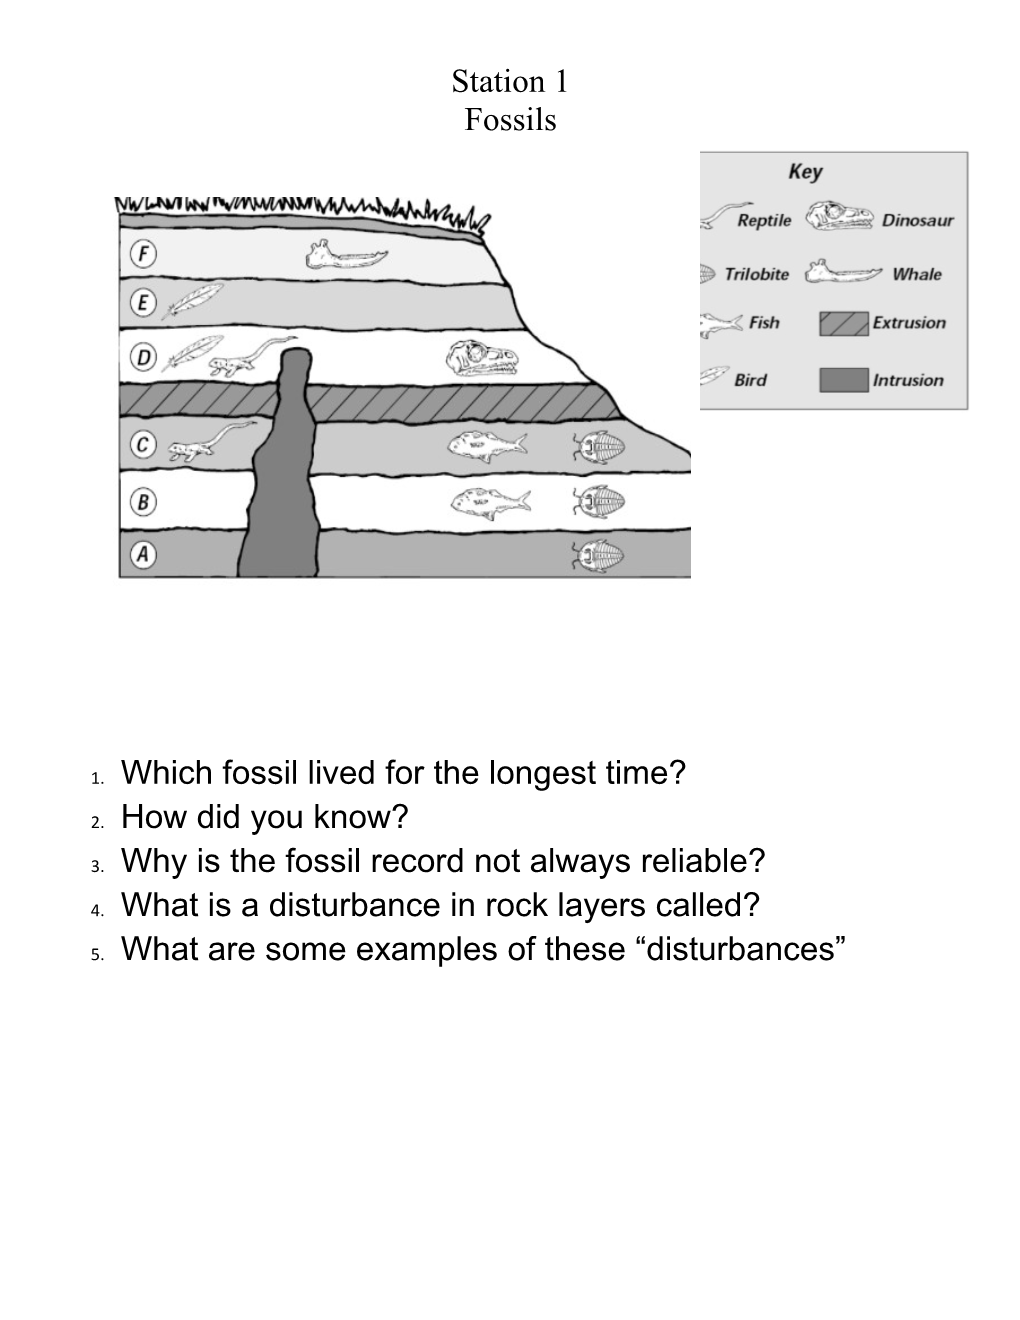 1. Which Fossil Lived for the Longest Time? s1